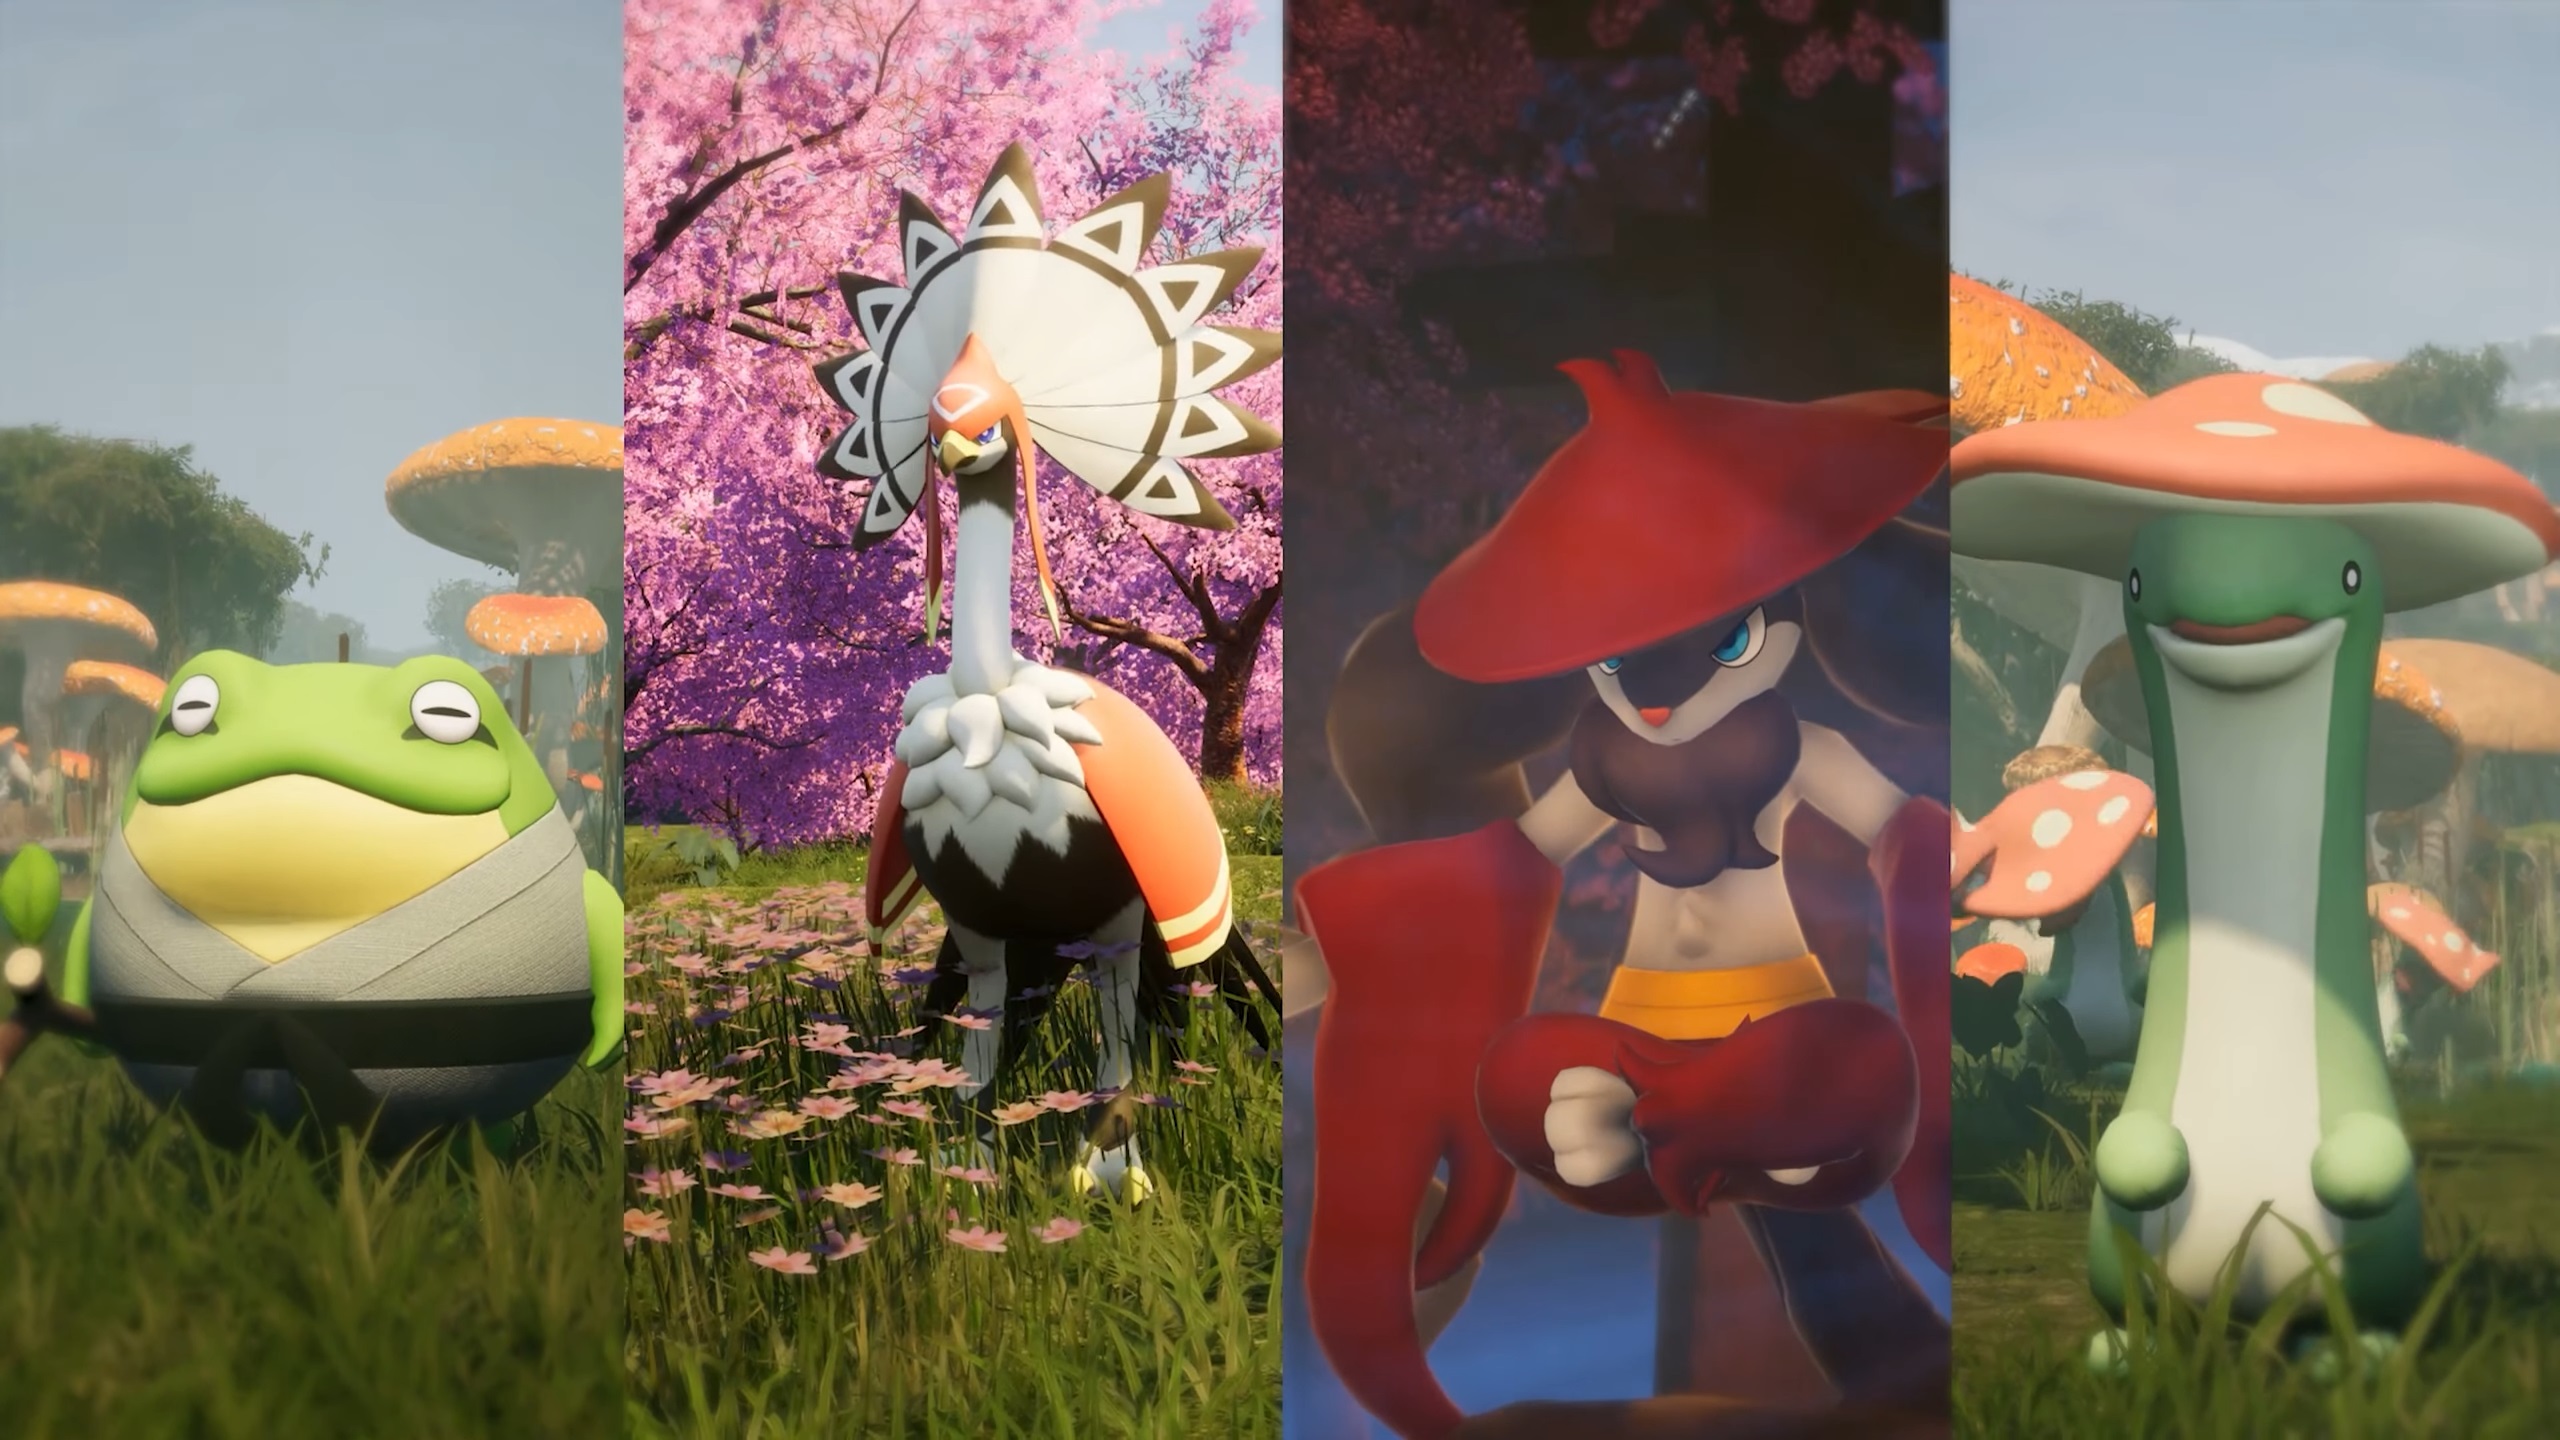  Palworld reveals 4 of the 'many more' new Pals coming in its summer update 